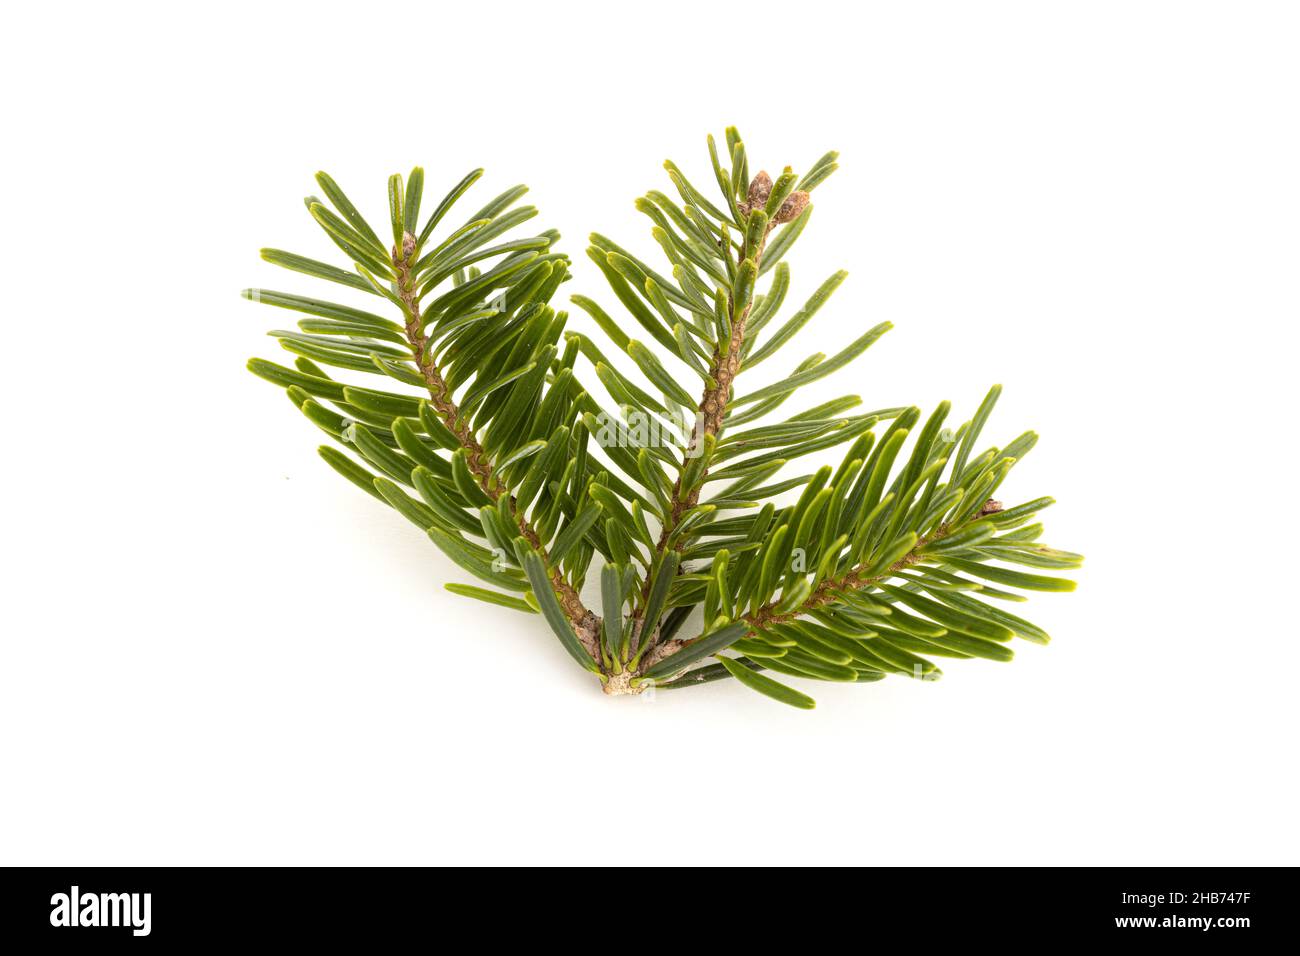 Caucasian fir twig isolated on white background. Abies nordmanniana Stock Photo